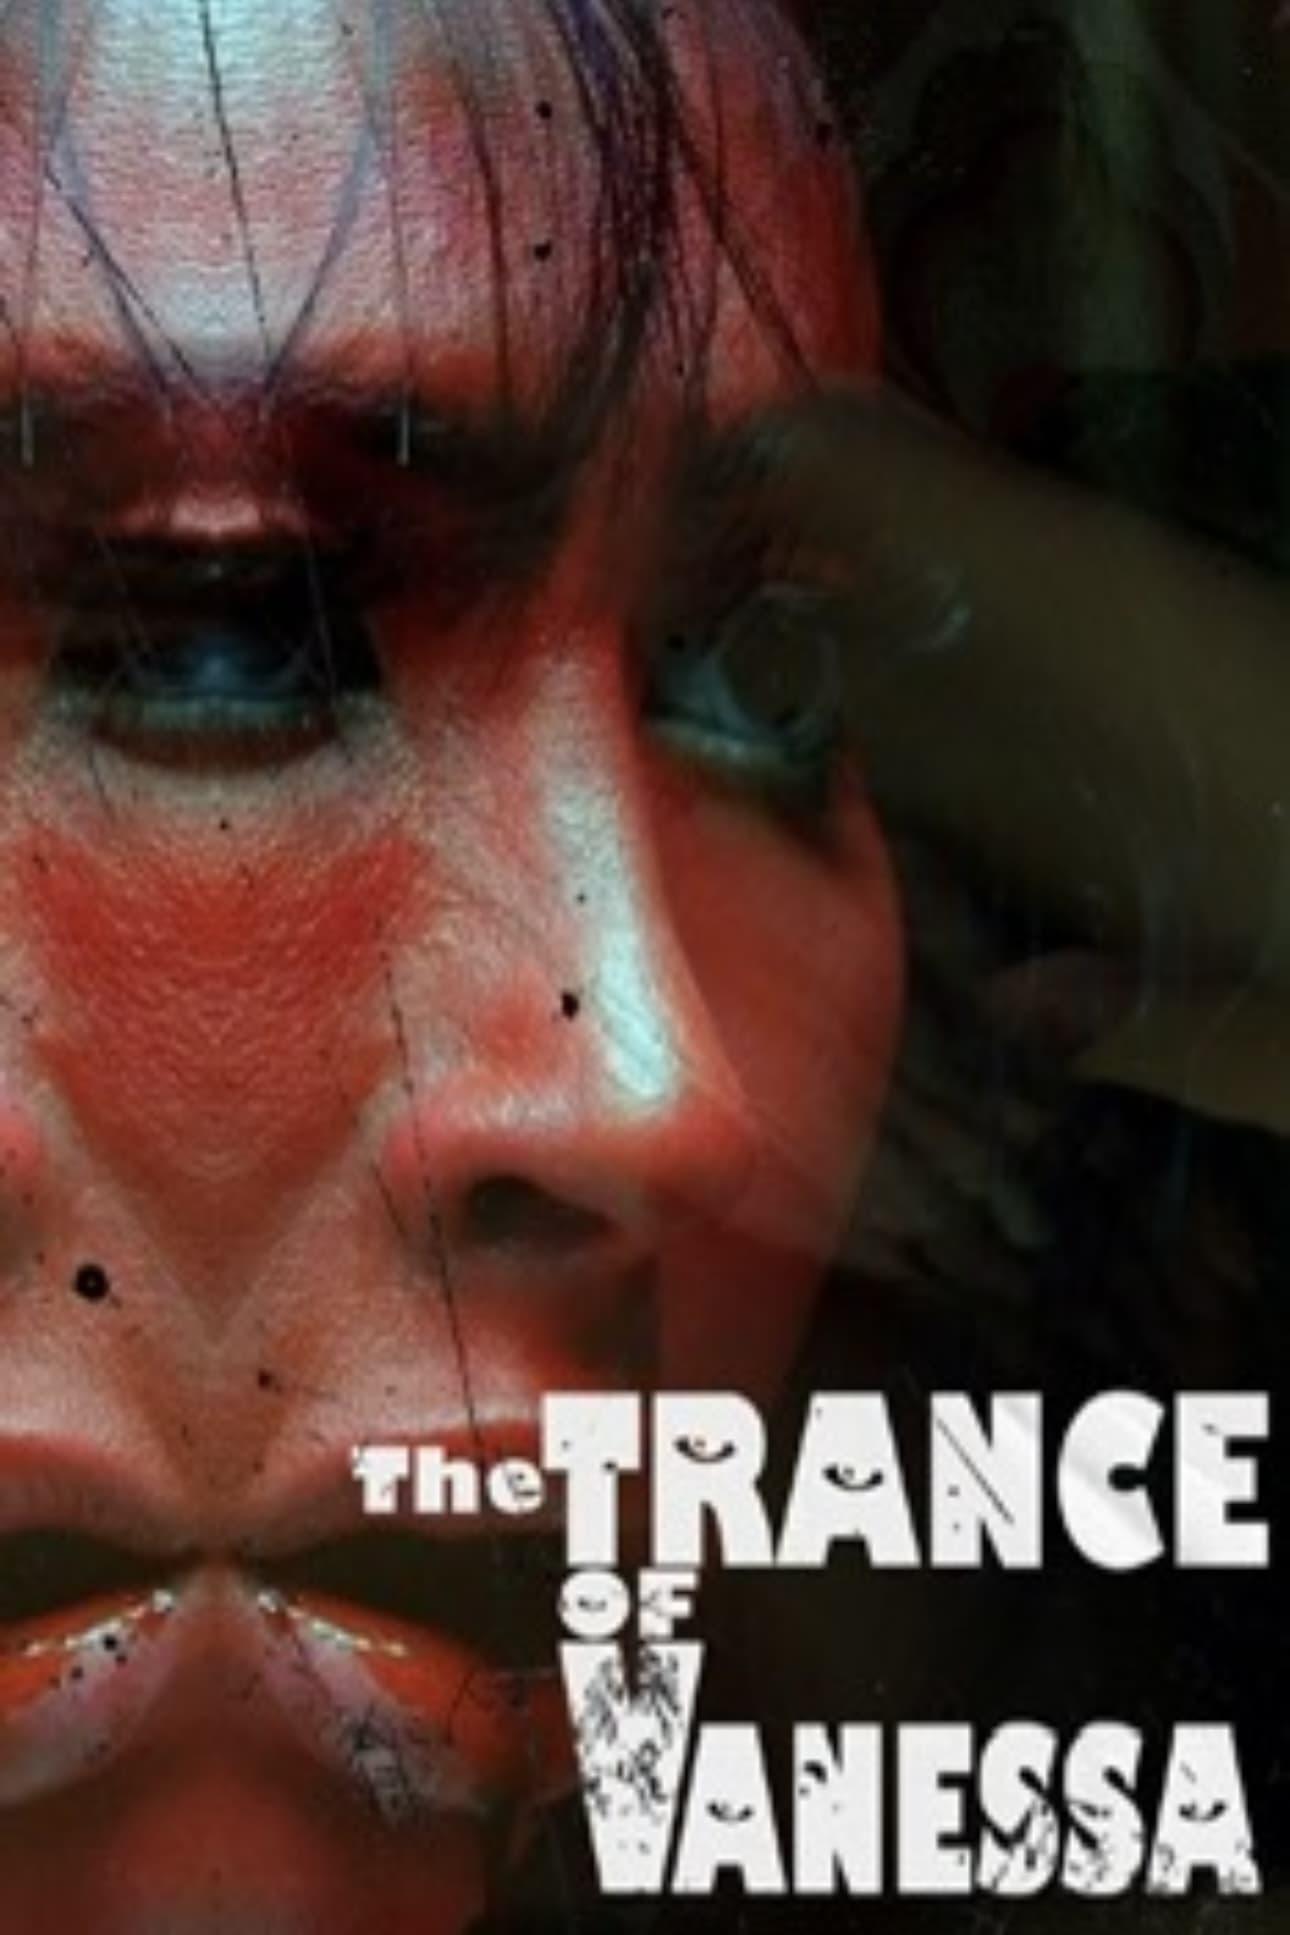 The Trance of Vanessa poster